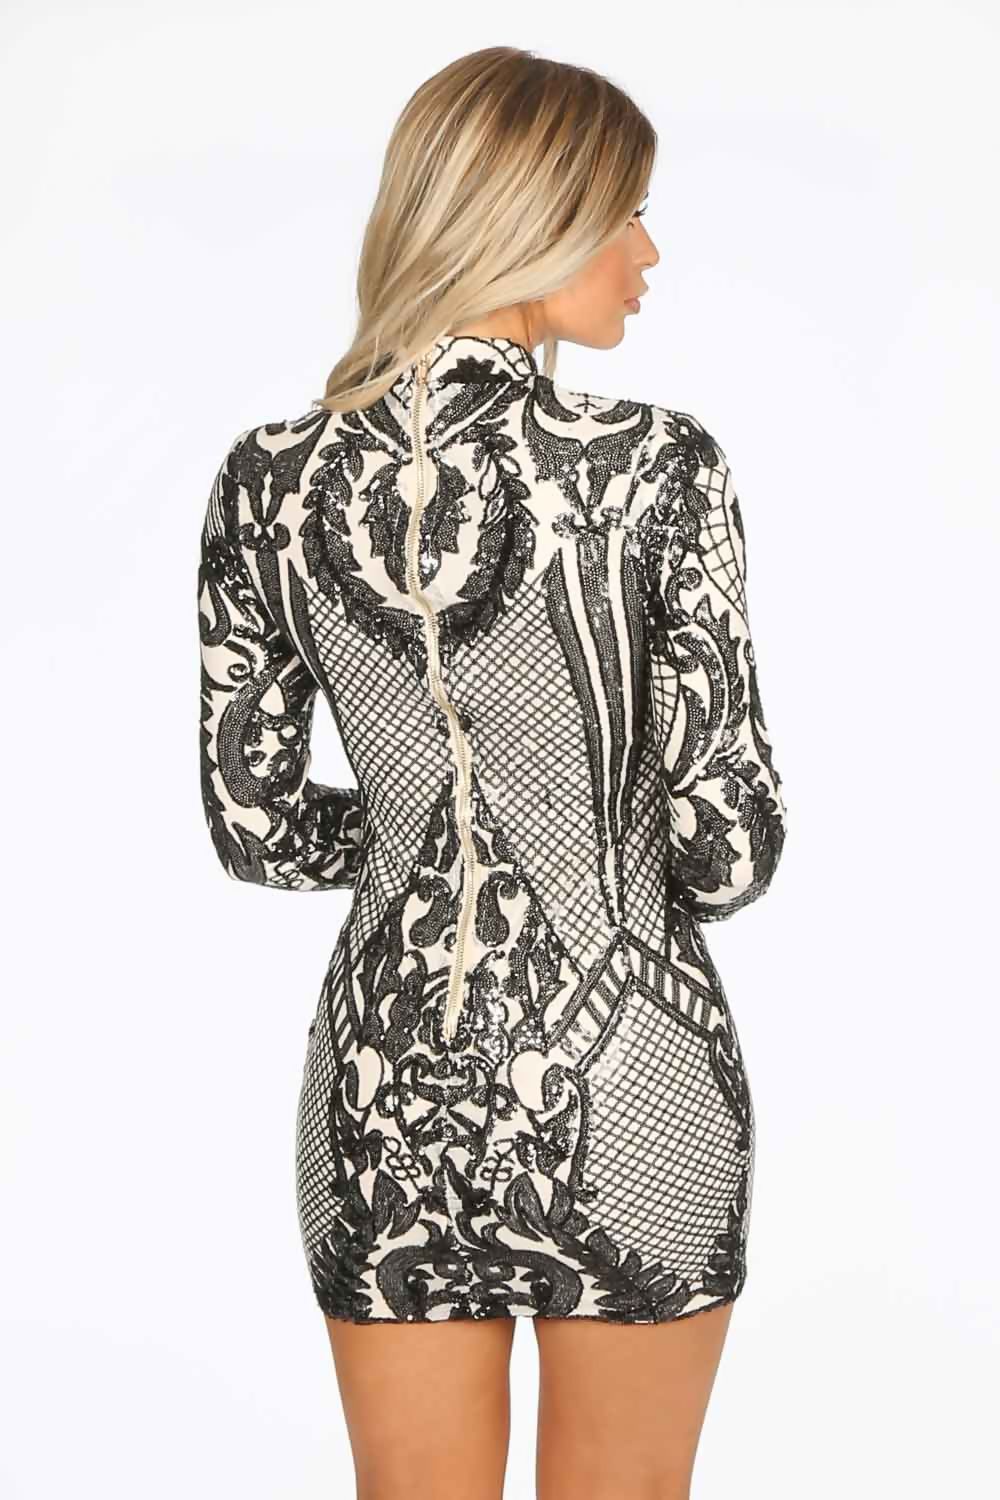 Model wears 4ever stunning premium deluxe a sequined  cream and black long sleeved dress, with a high neck and chunky gold back zip fastening.  Model has her back to the camera and looks to the side. 